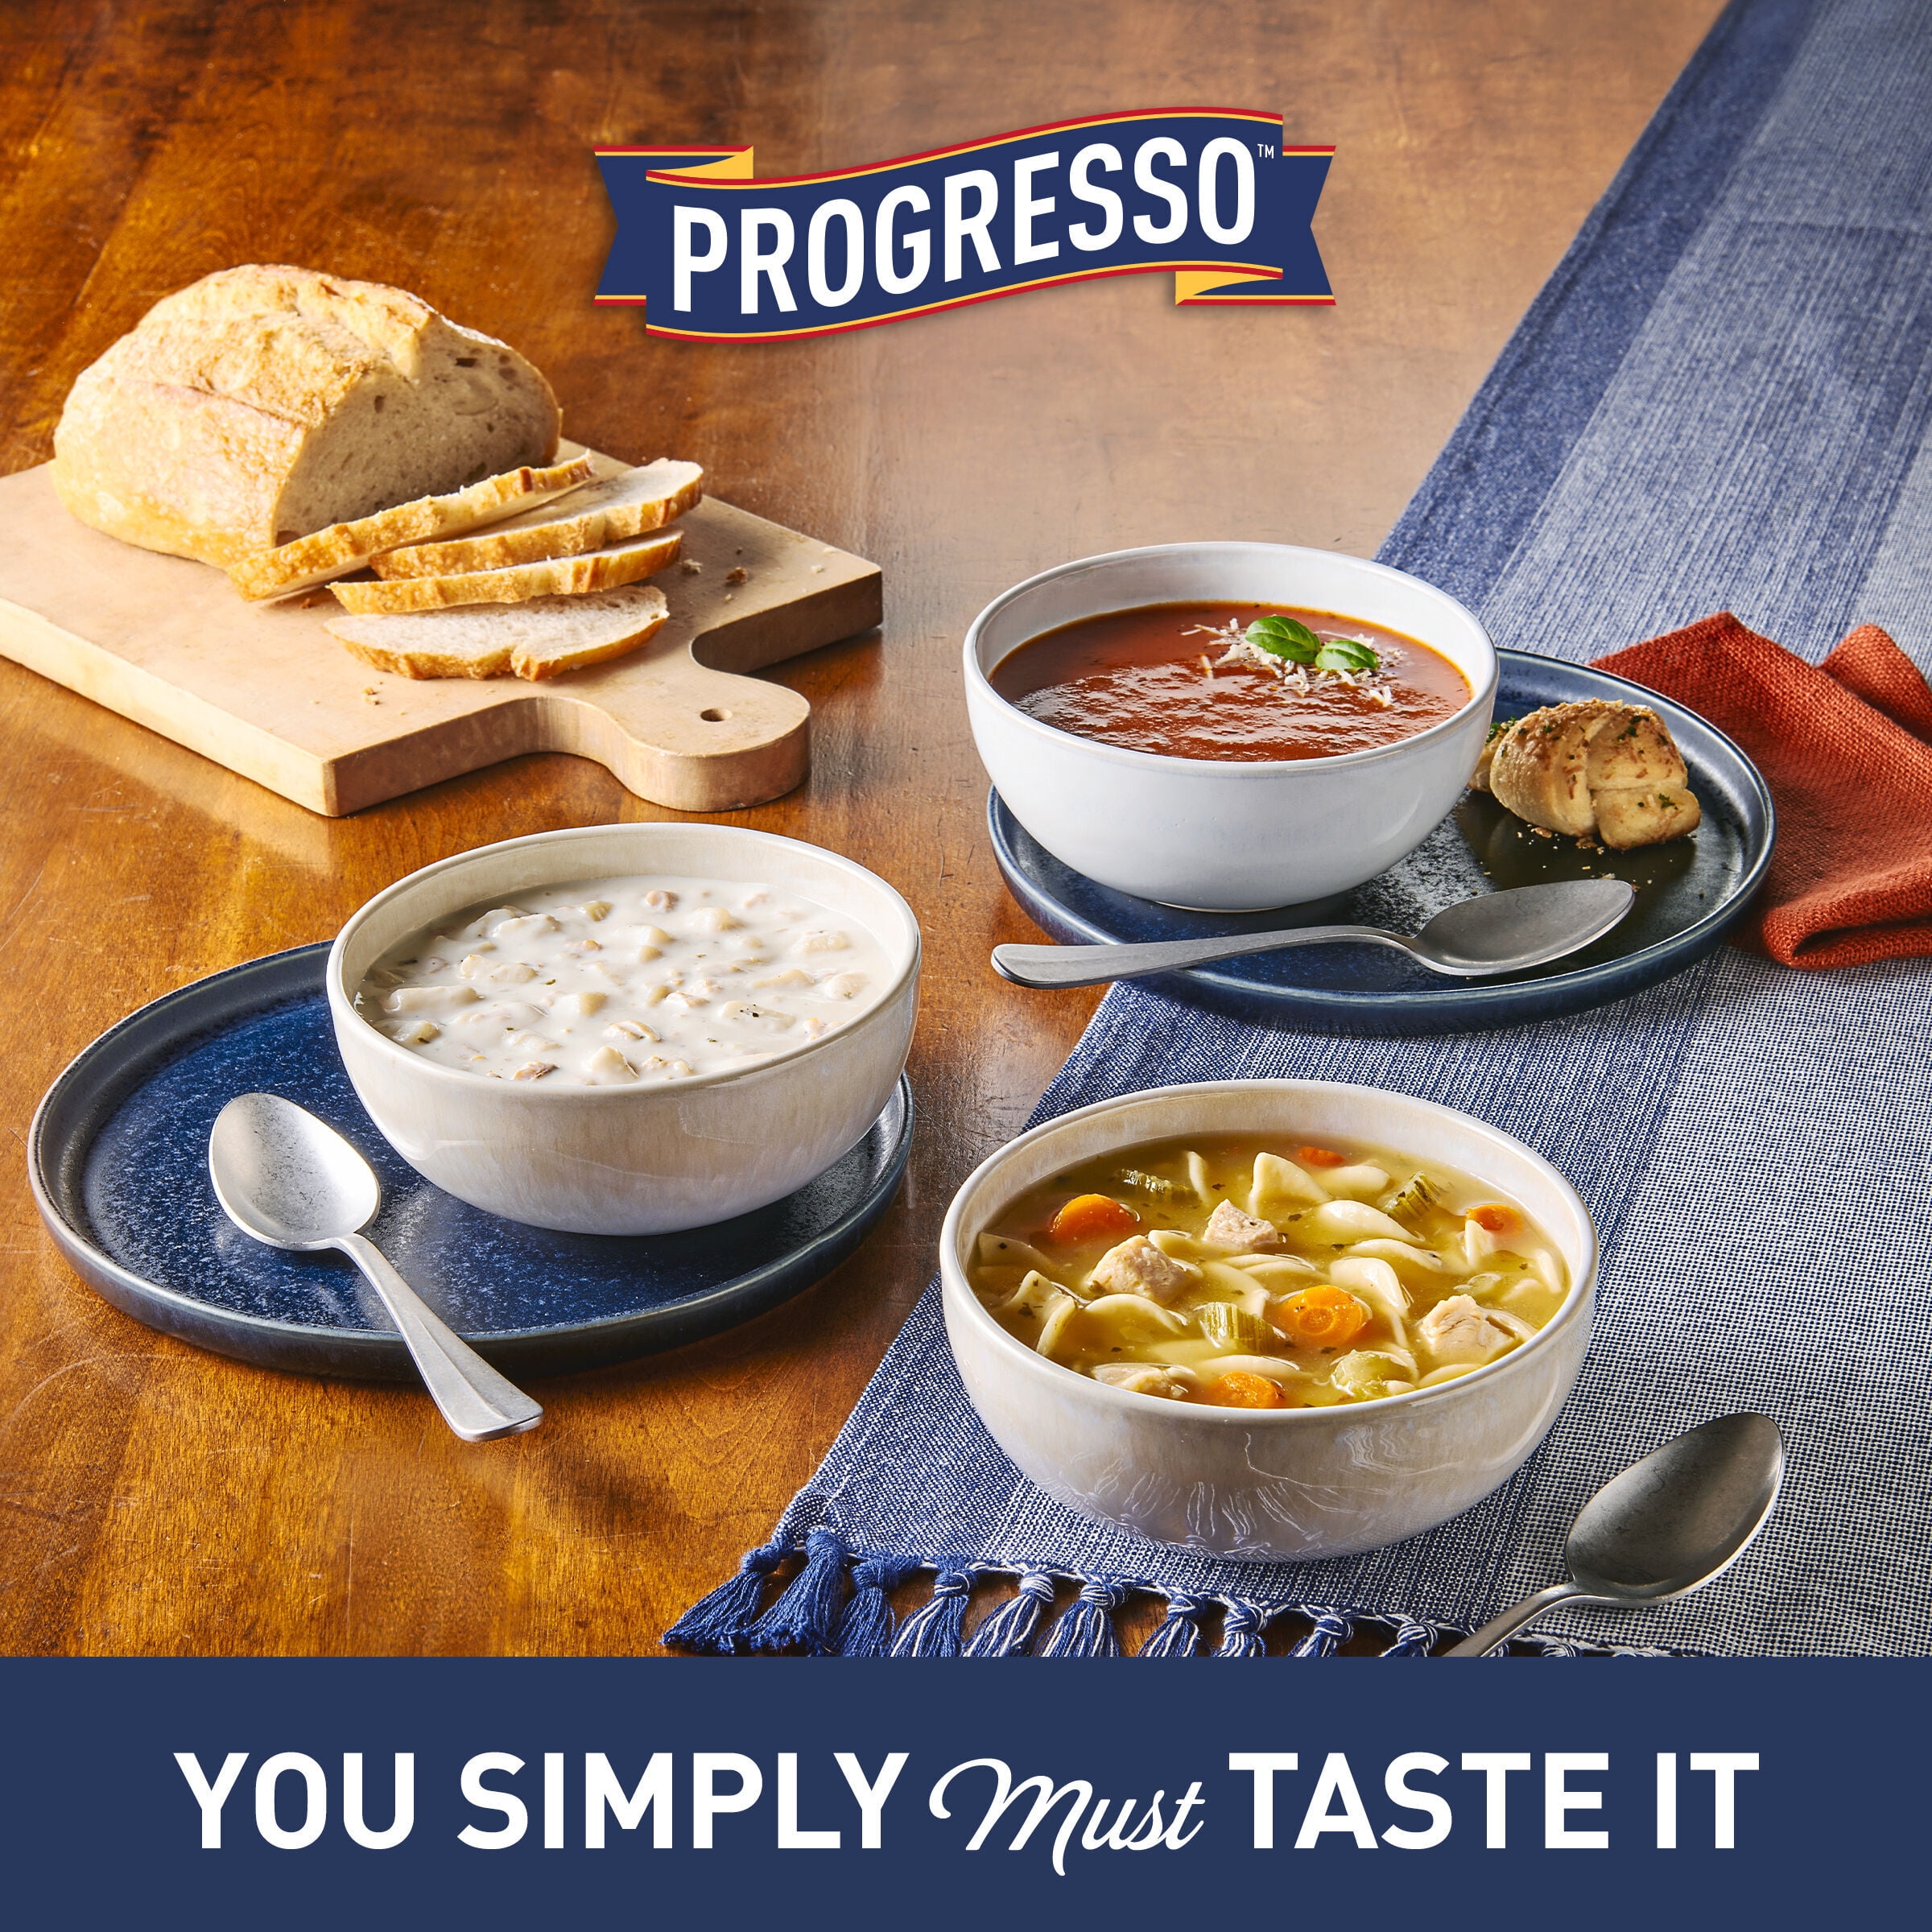 Progresso Traditional, Chicken Rice with Vegetables Canned Soup, 19 oz.